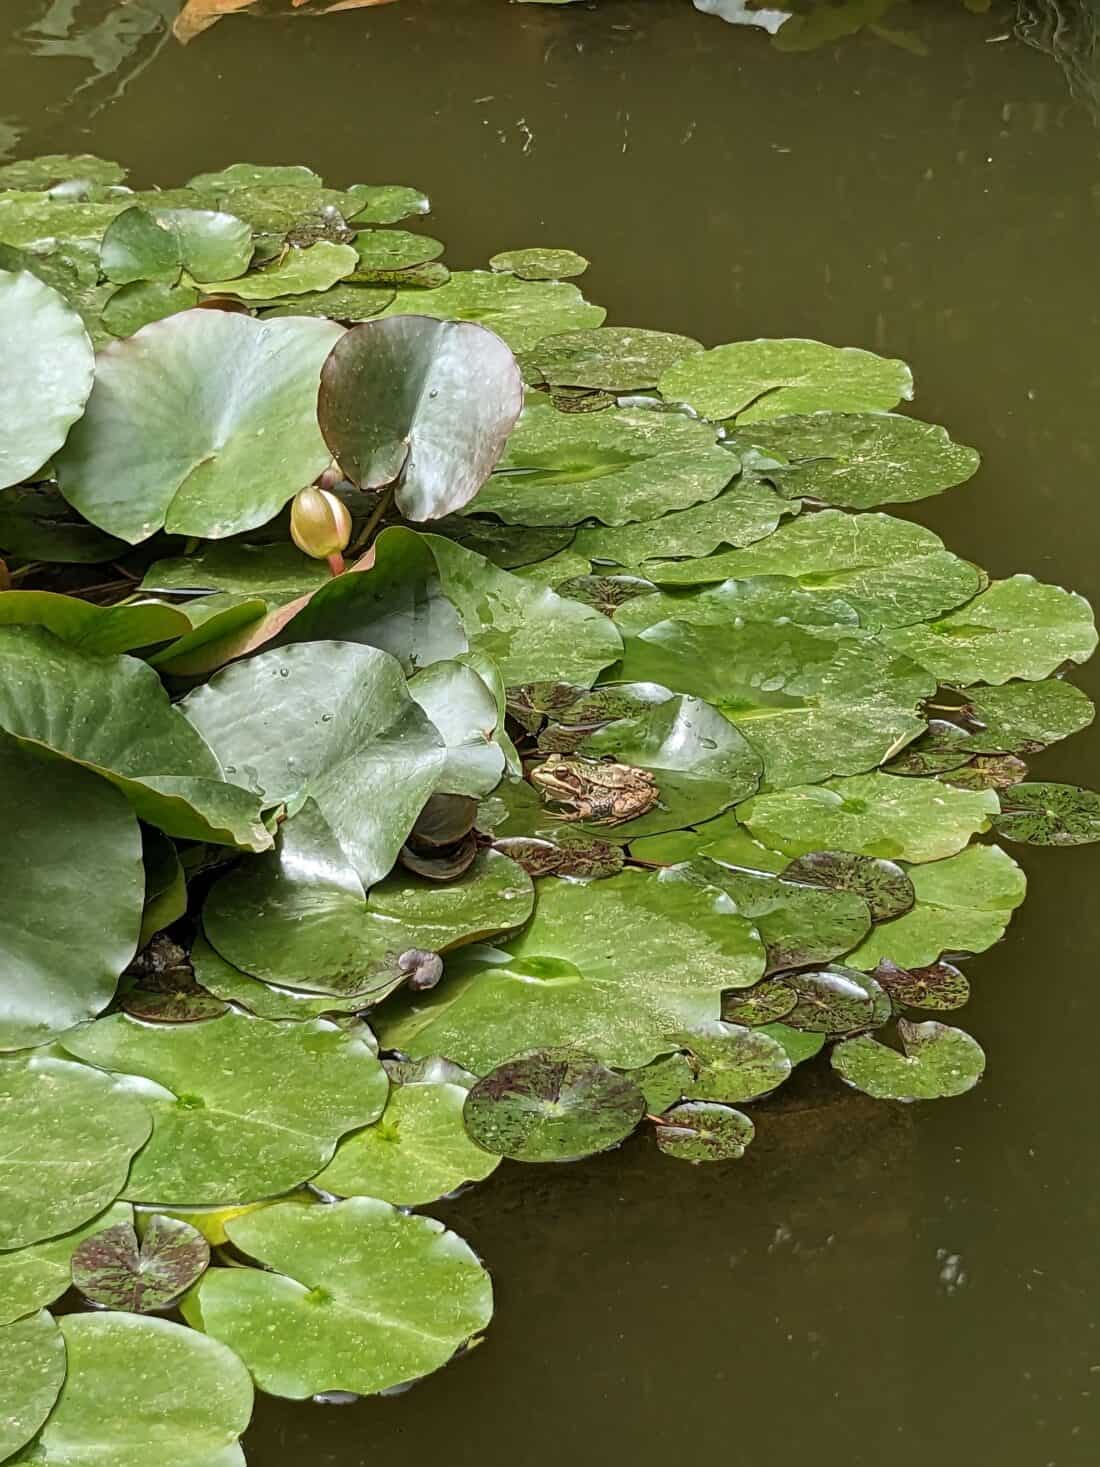 A frog and a snail on water lily pads in a pond.